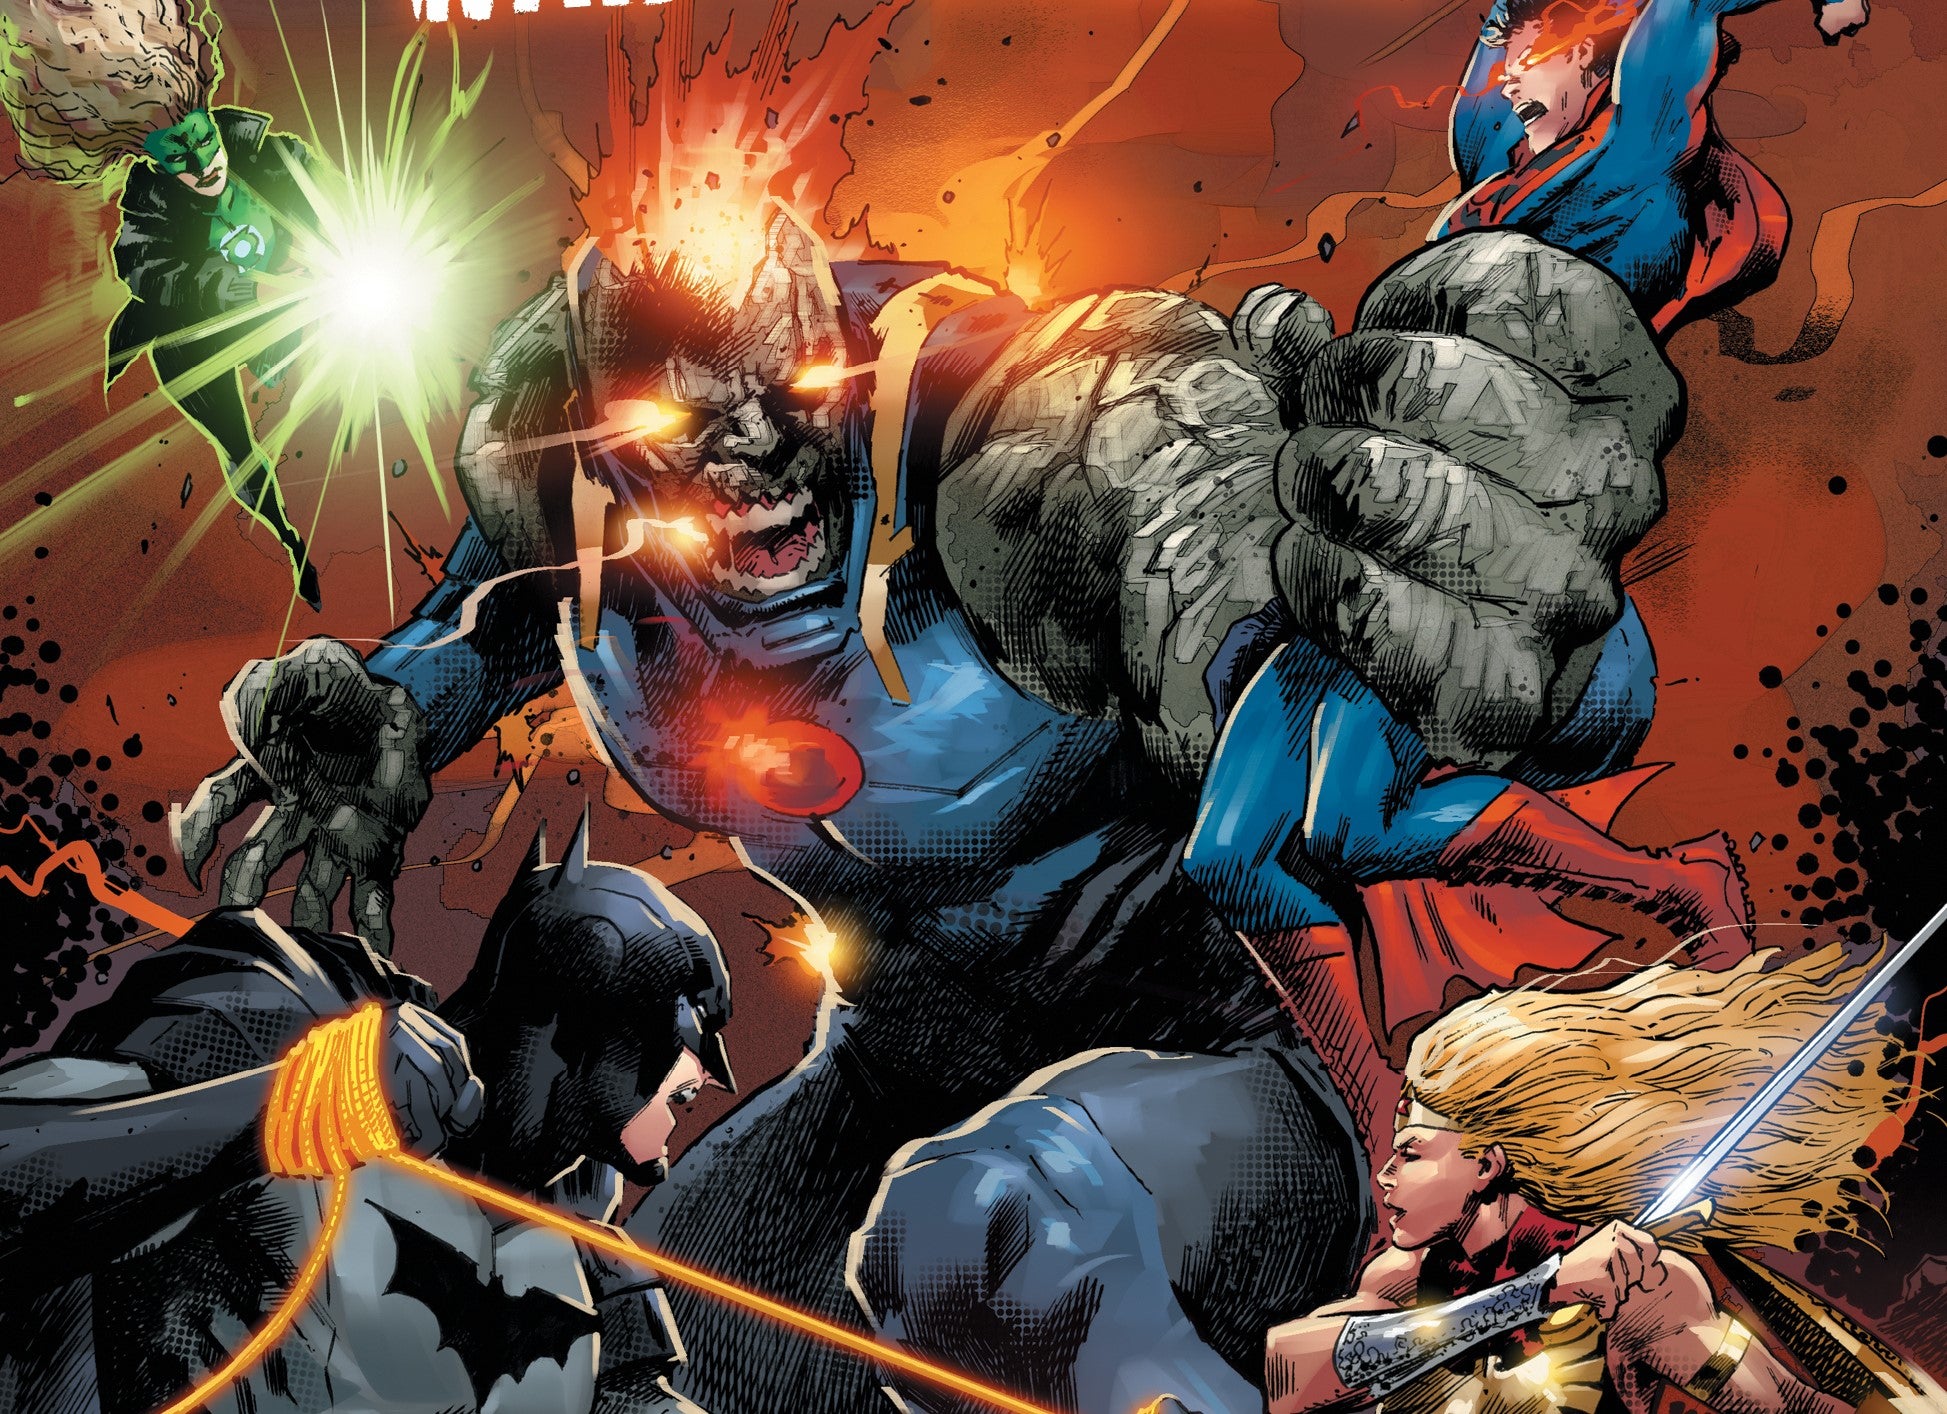 Image for DCeased series reaches its final chapter with War of the Undead Gods